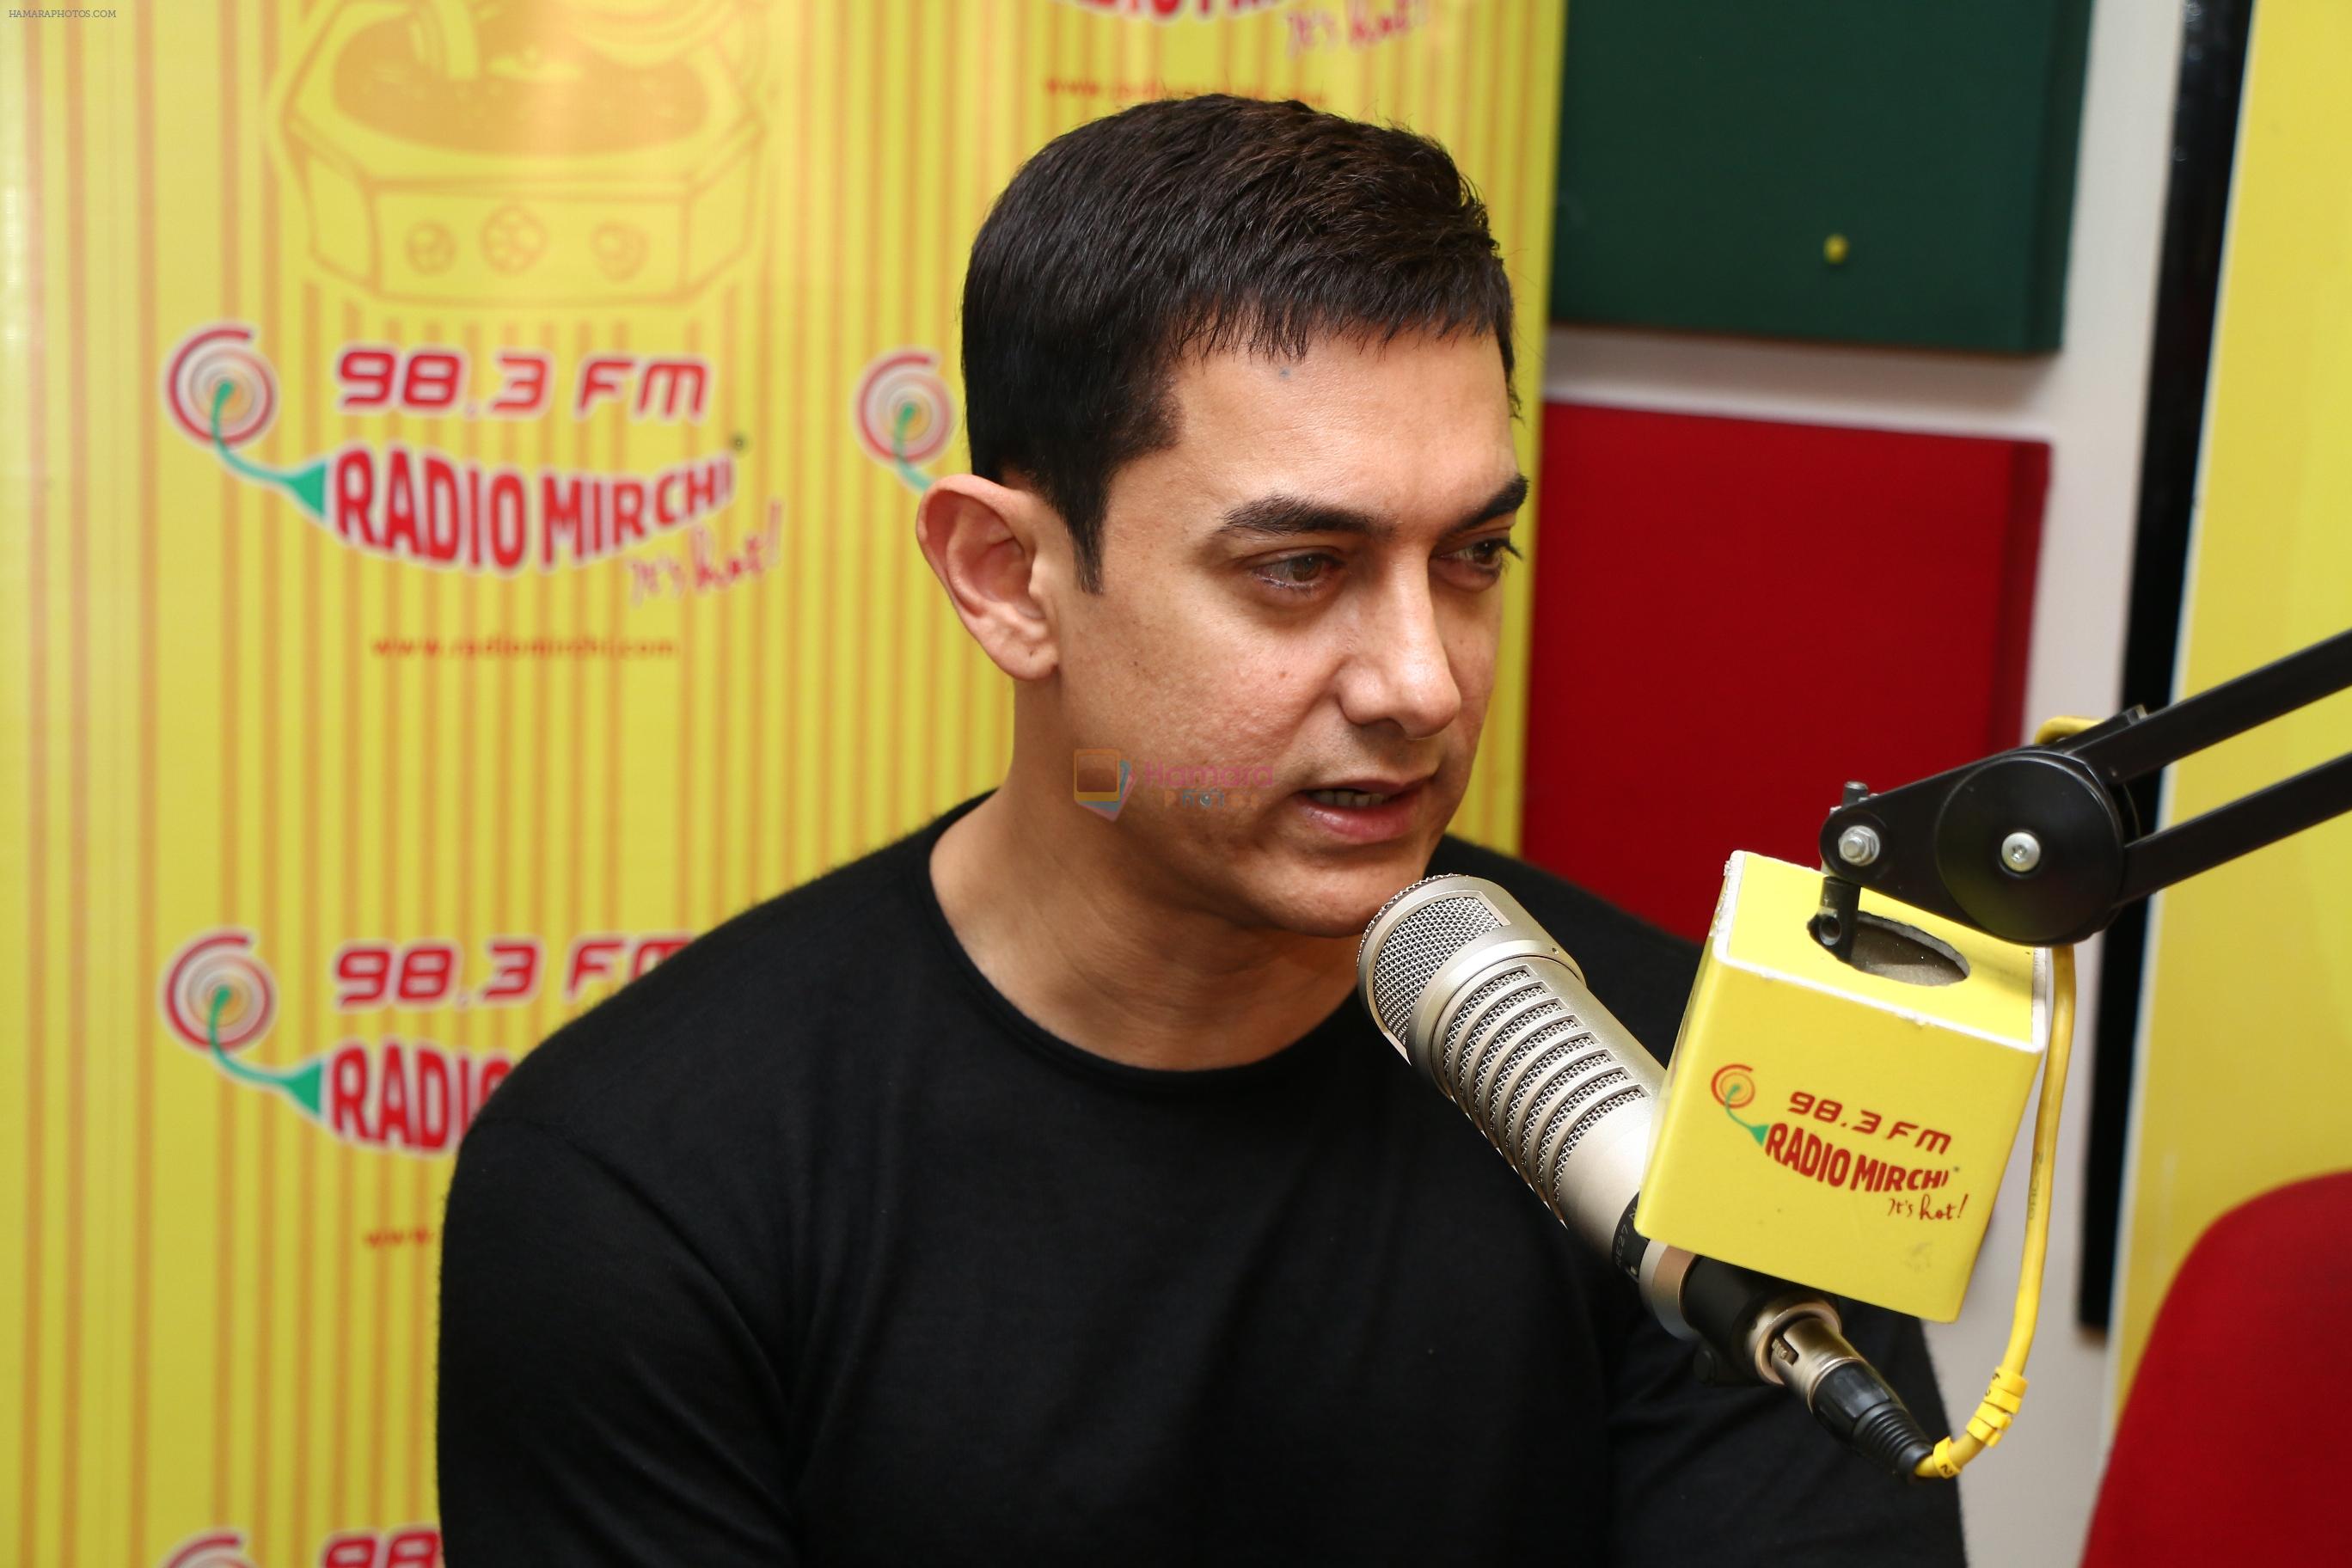 Aamir Khan at Radio Mirchi studio for promotion of his upcoming movie Dhoom 3